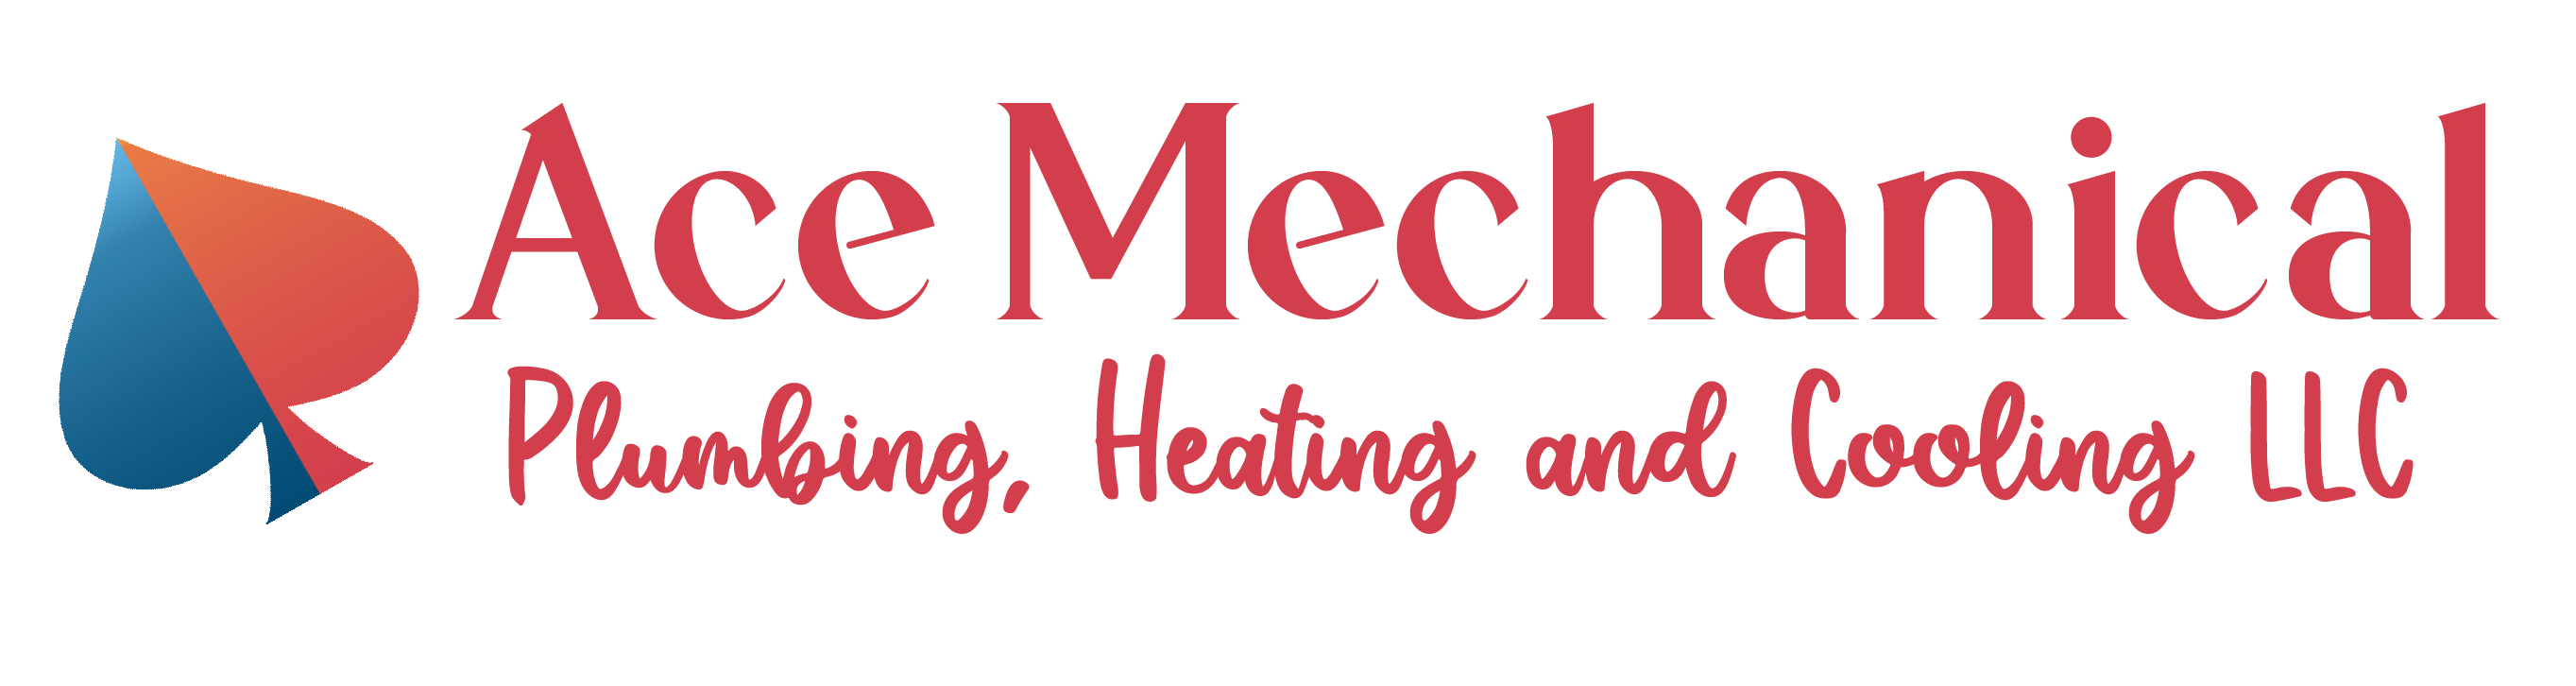 Ace Mechanical Plumbing Heating and Cooling